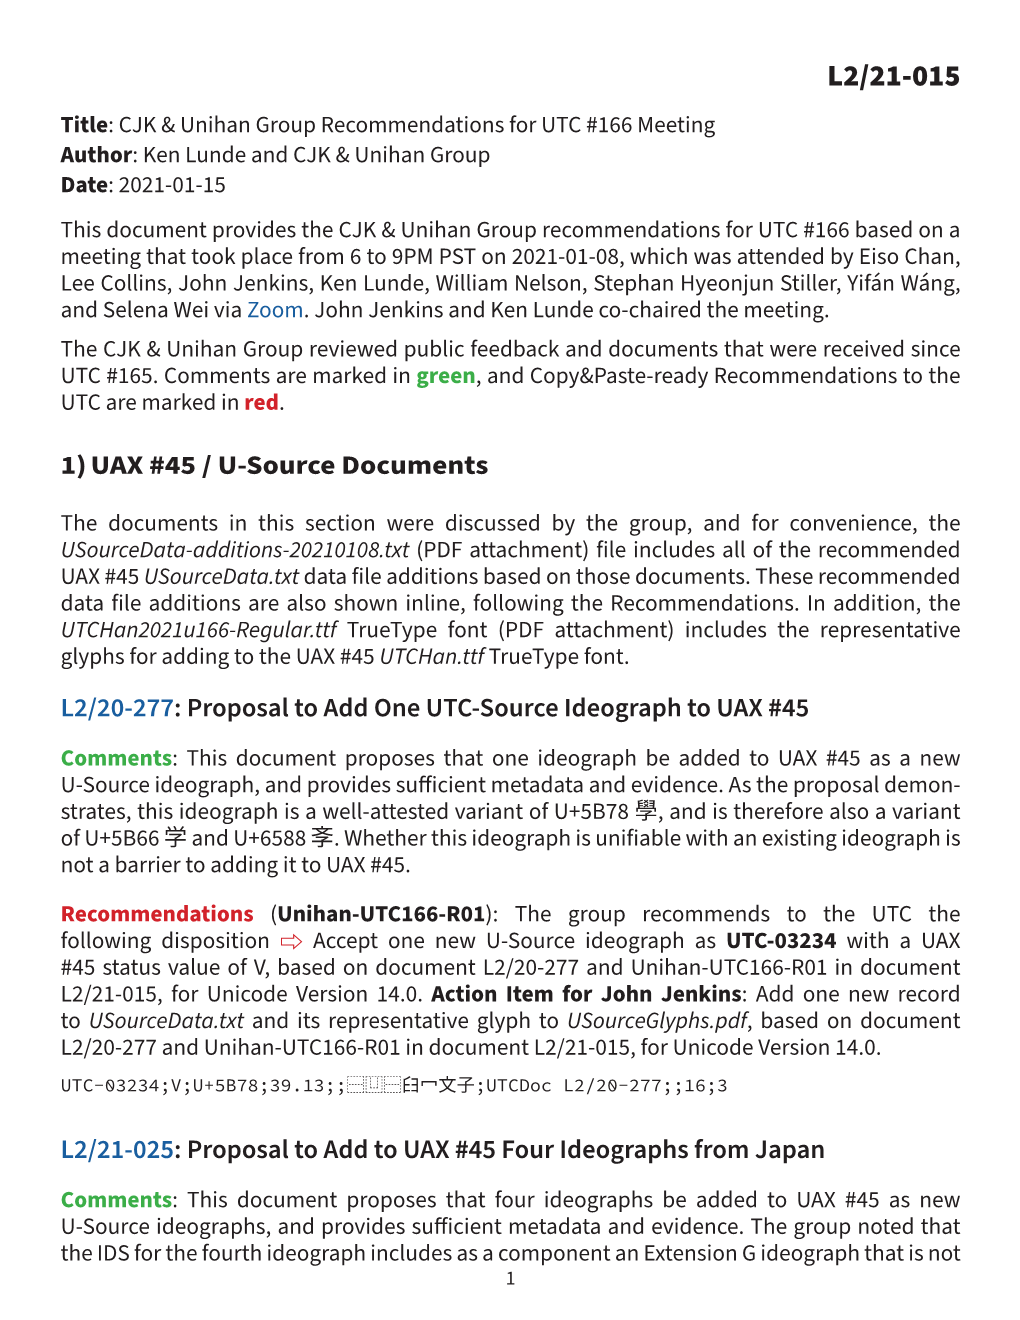 CJK & Unihan Group Recommendations For